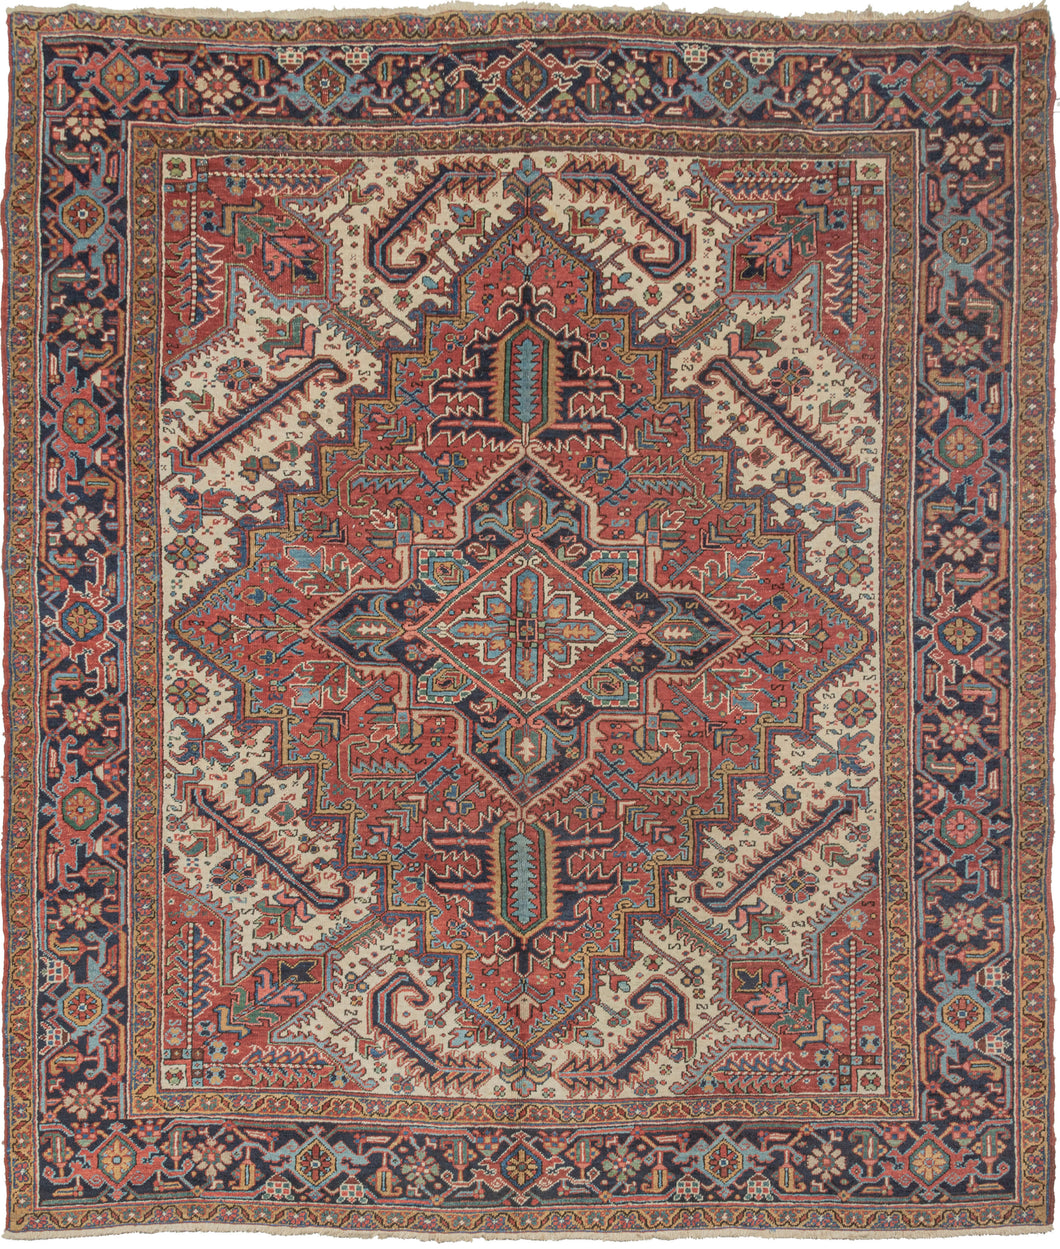 This Serrated Leaves Heriz Rug features a geometric central medallion on a rich red ground. Surrounded by a field of bright ivory and four trident cornices. Large and 